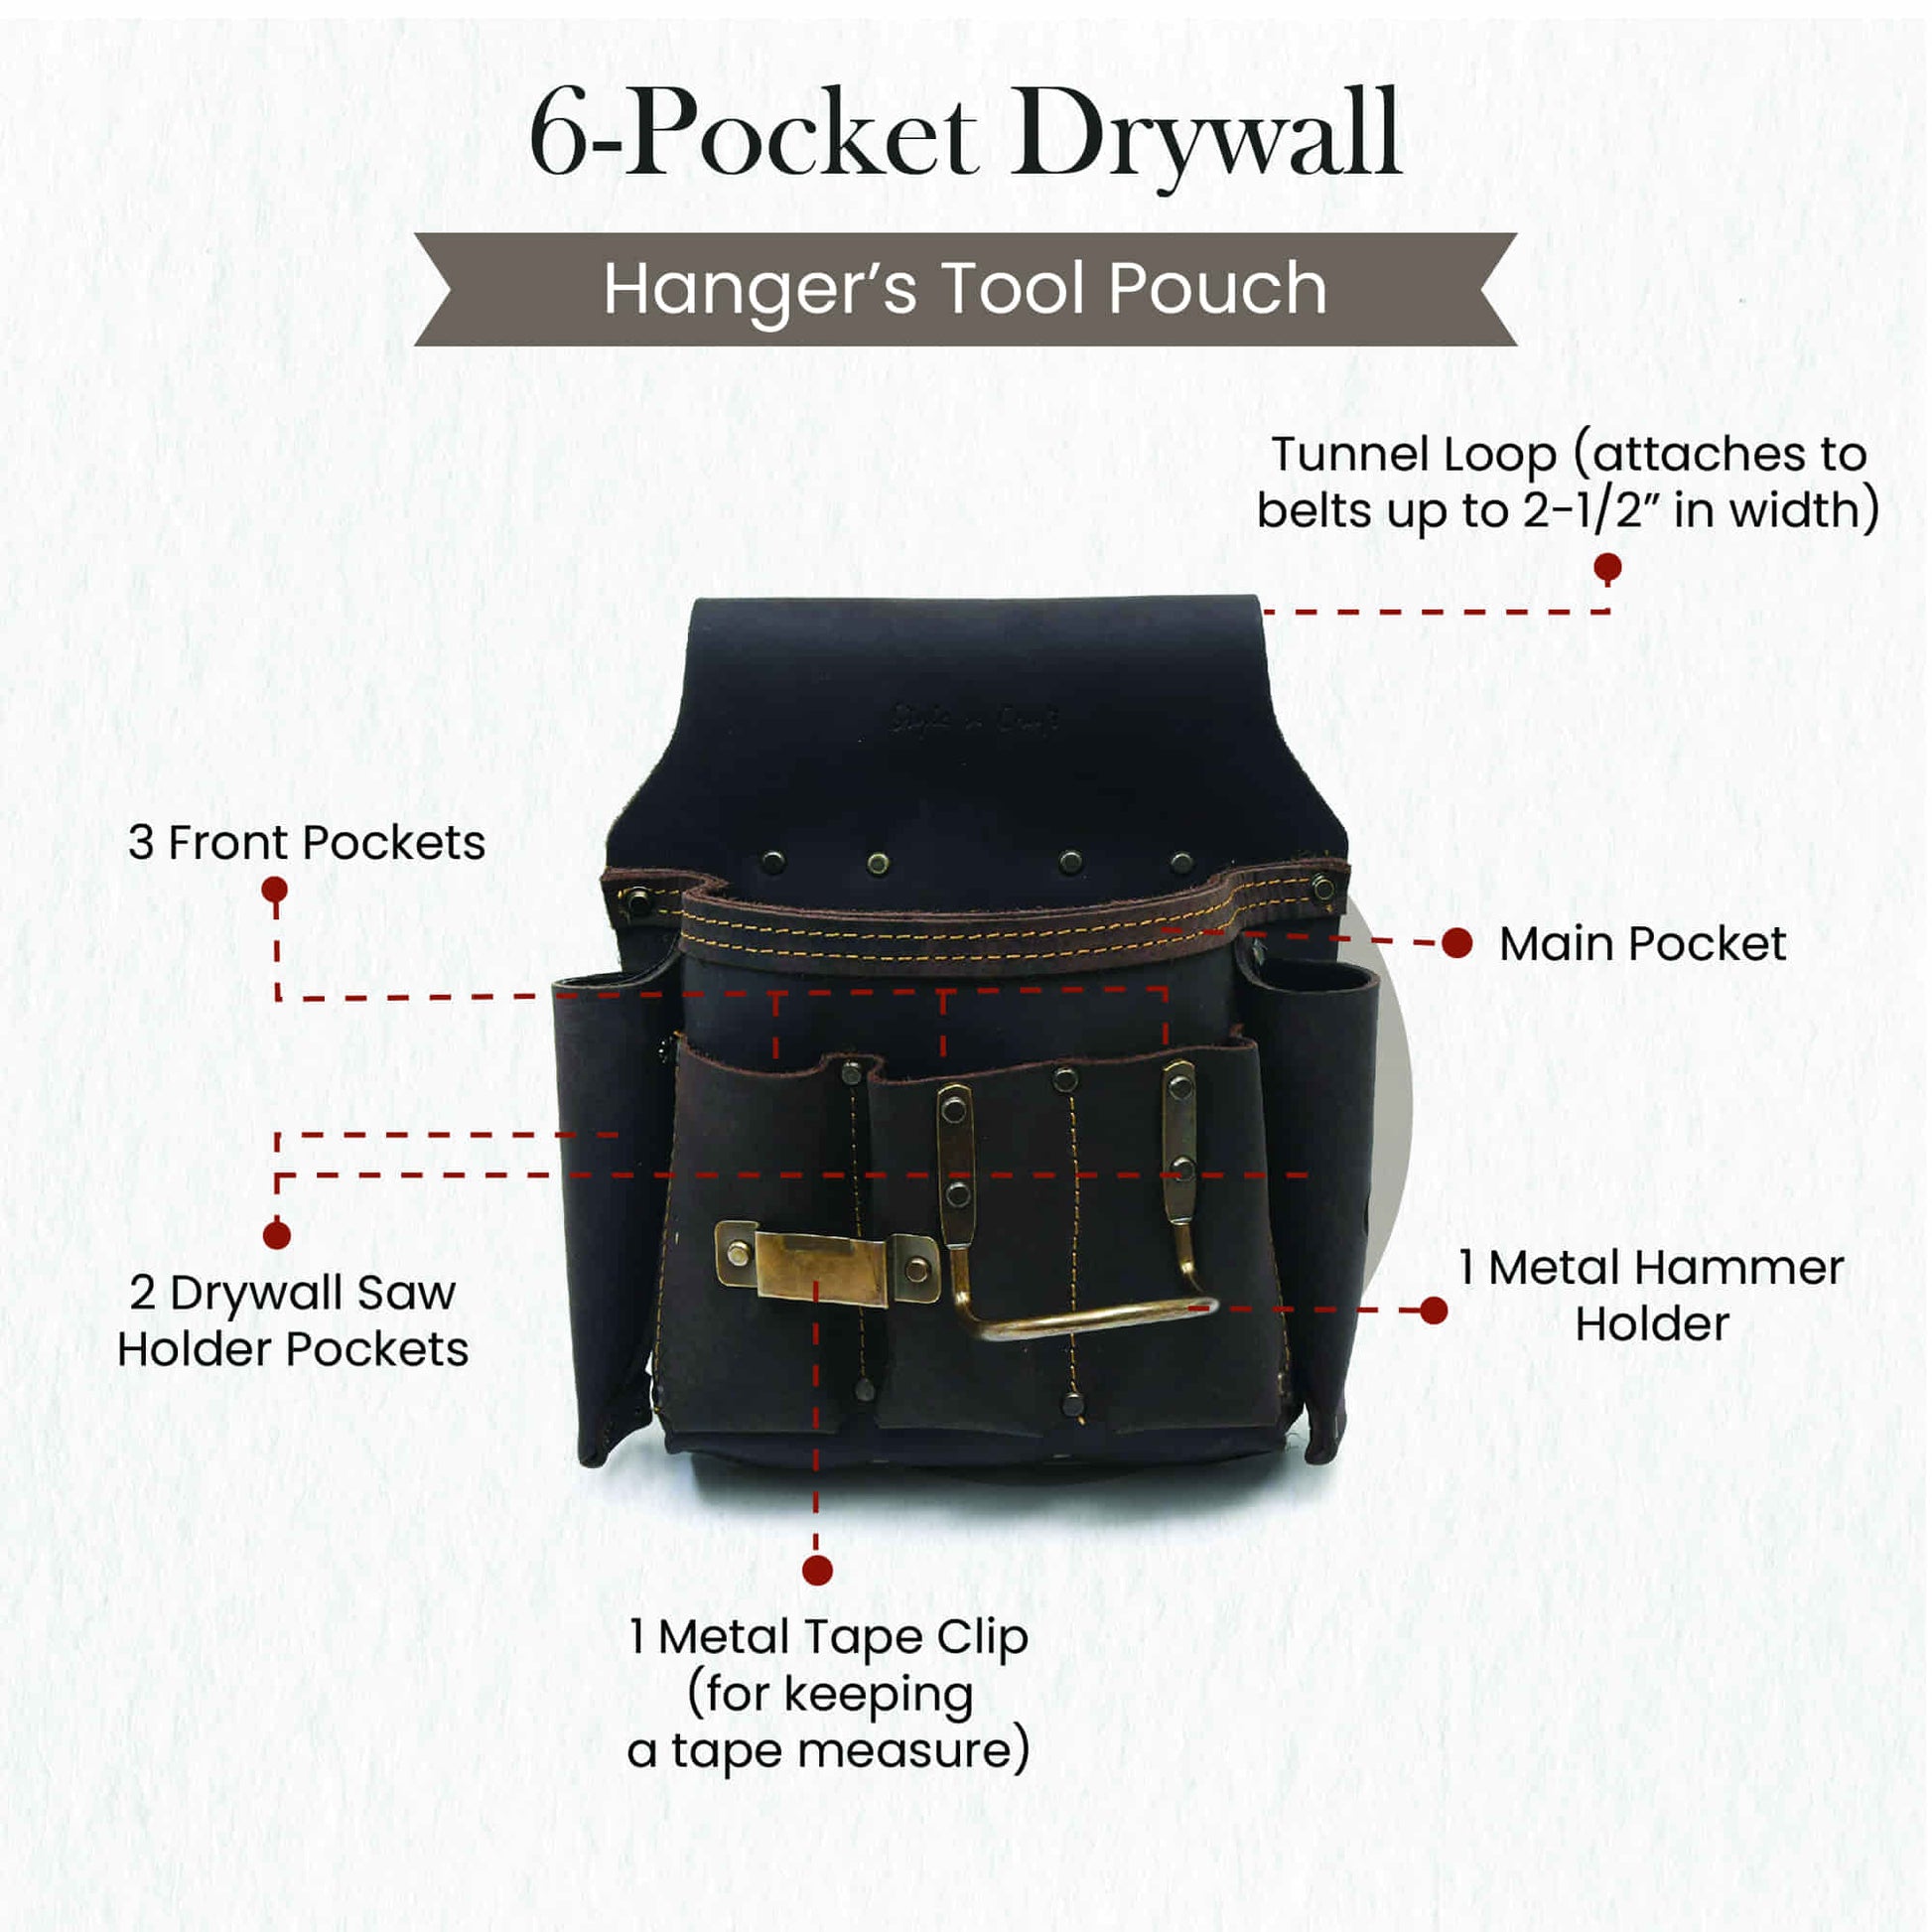 Style n Craft 70685 - 6 Pocket Drywall Hanger's Tool Pouch in Top Grain Oiled Leather with a Drywall Saw Holder on Each Side for Both Left & Right Handed Users - Front View Showing the Details